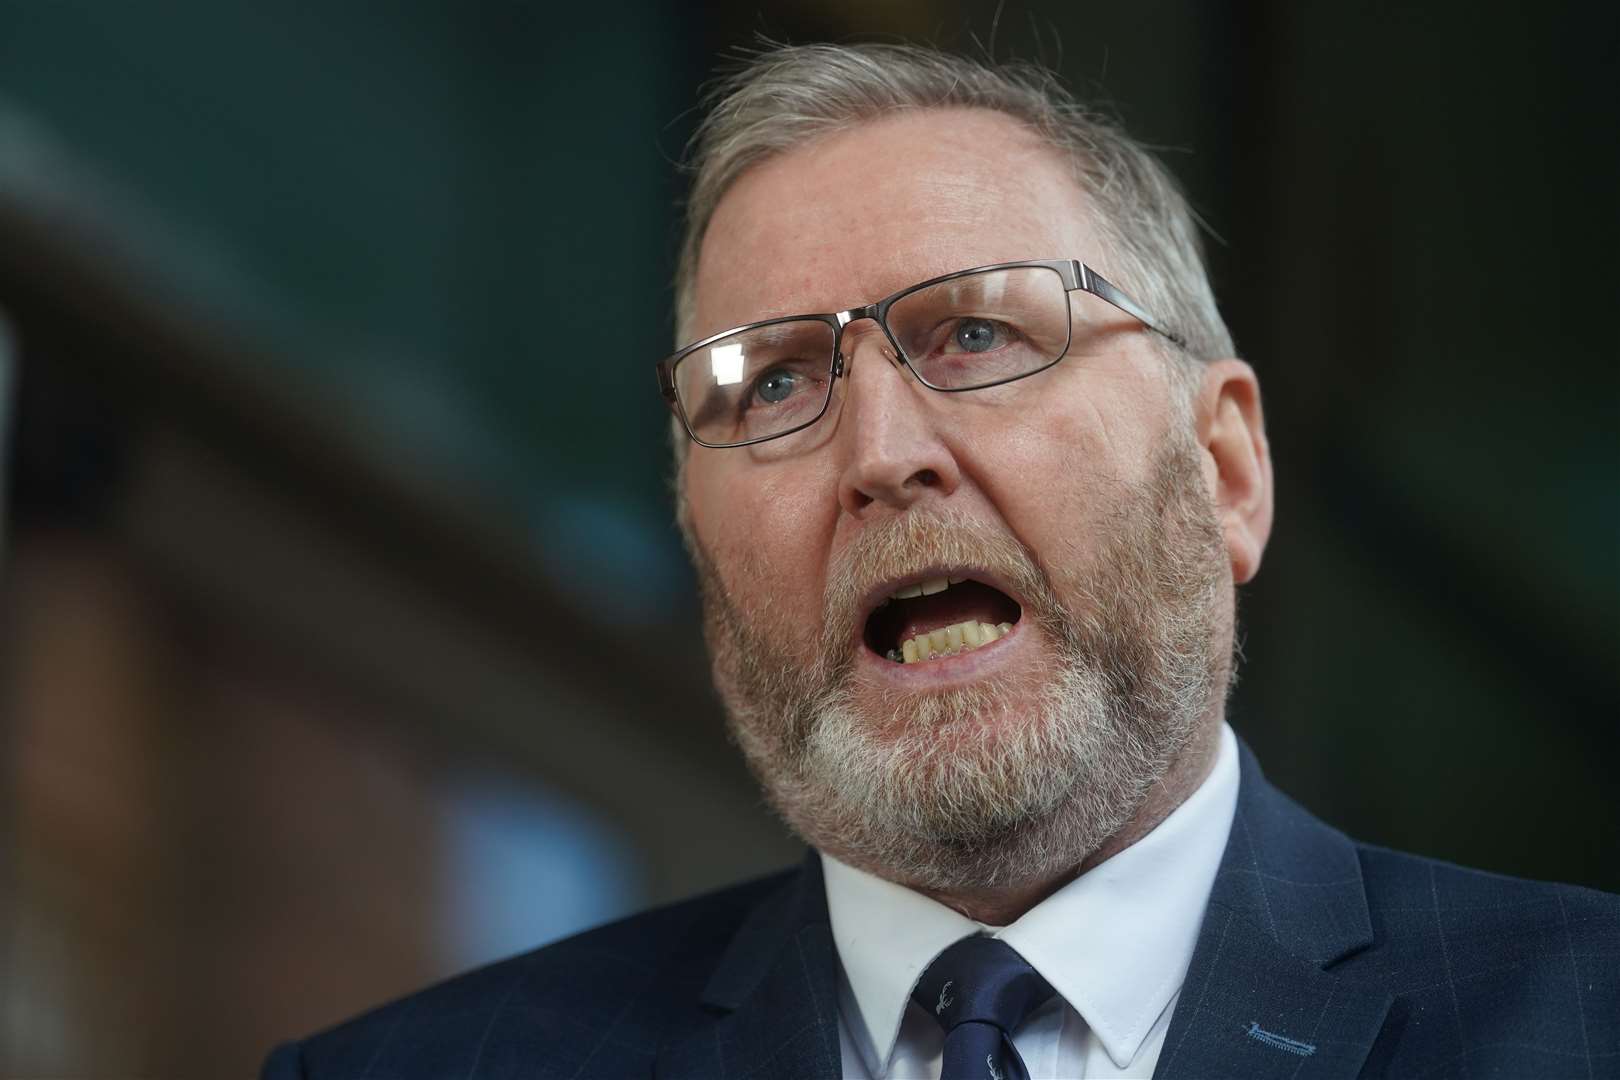 UUP leader Doug Beattie expressed frustration at the lack of information he said local politicians were receiving about the negotiations (Brian Lawless/PA)